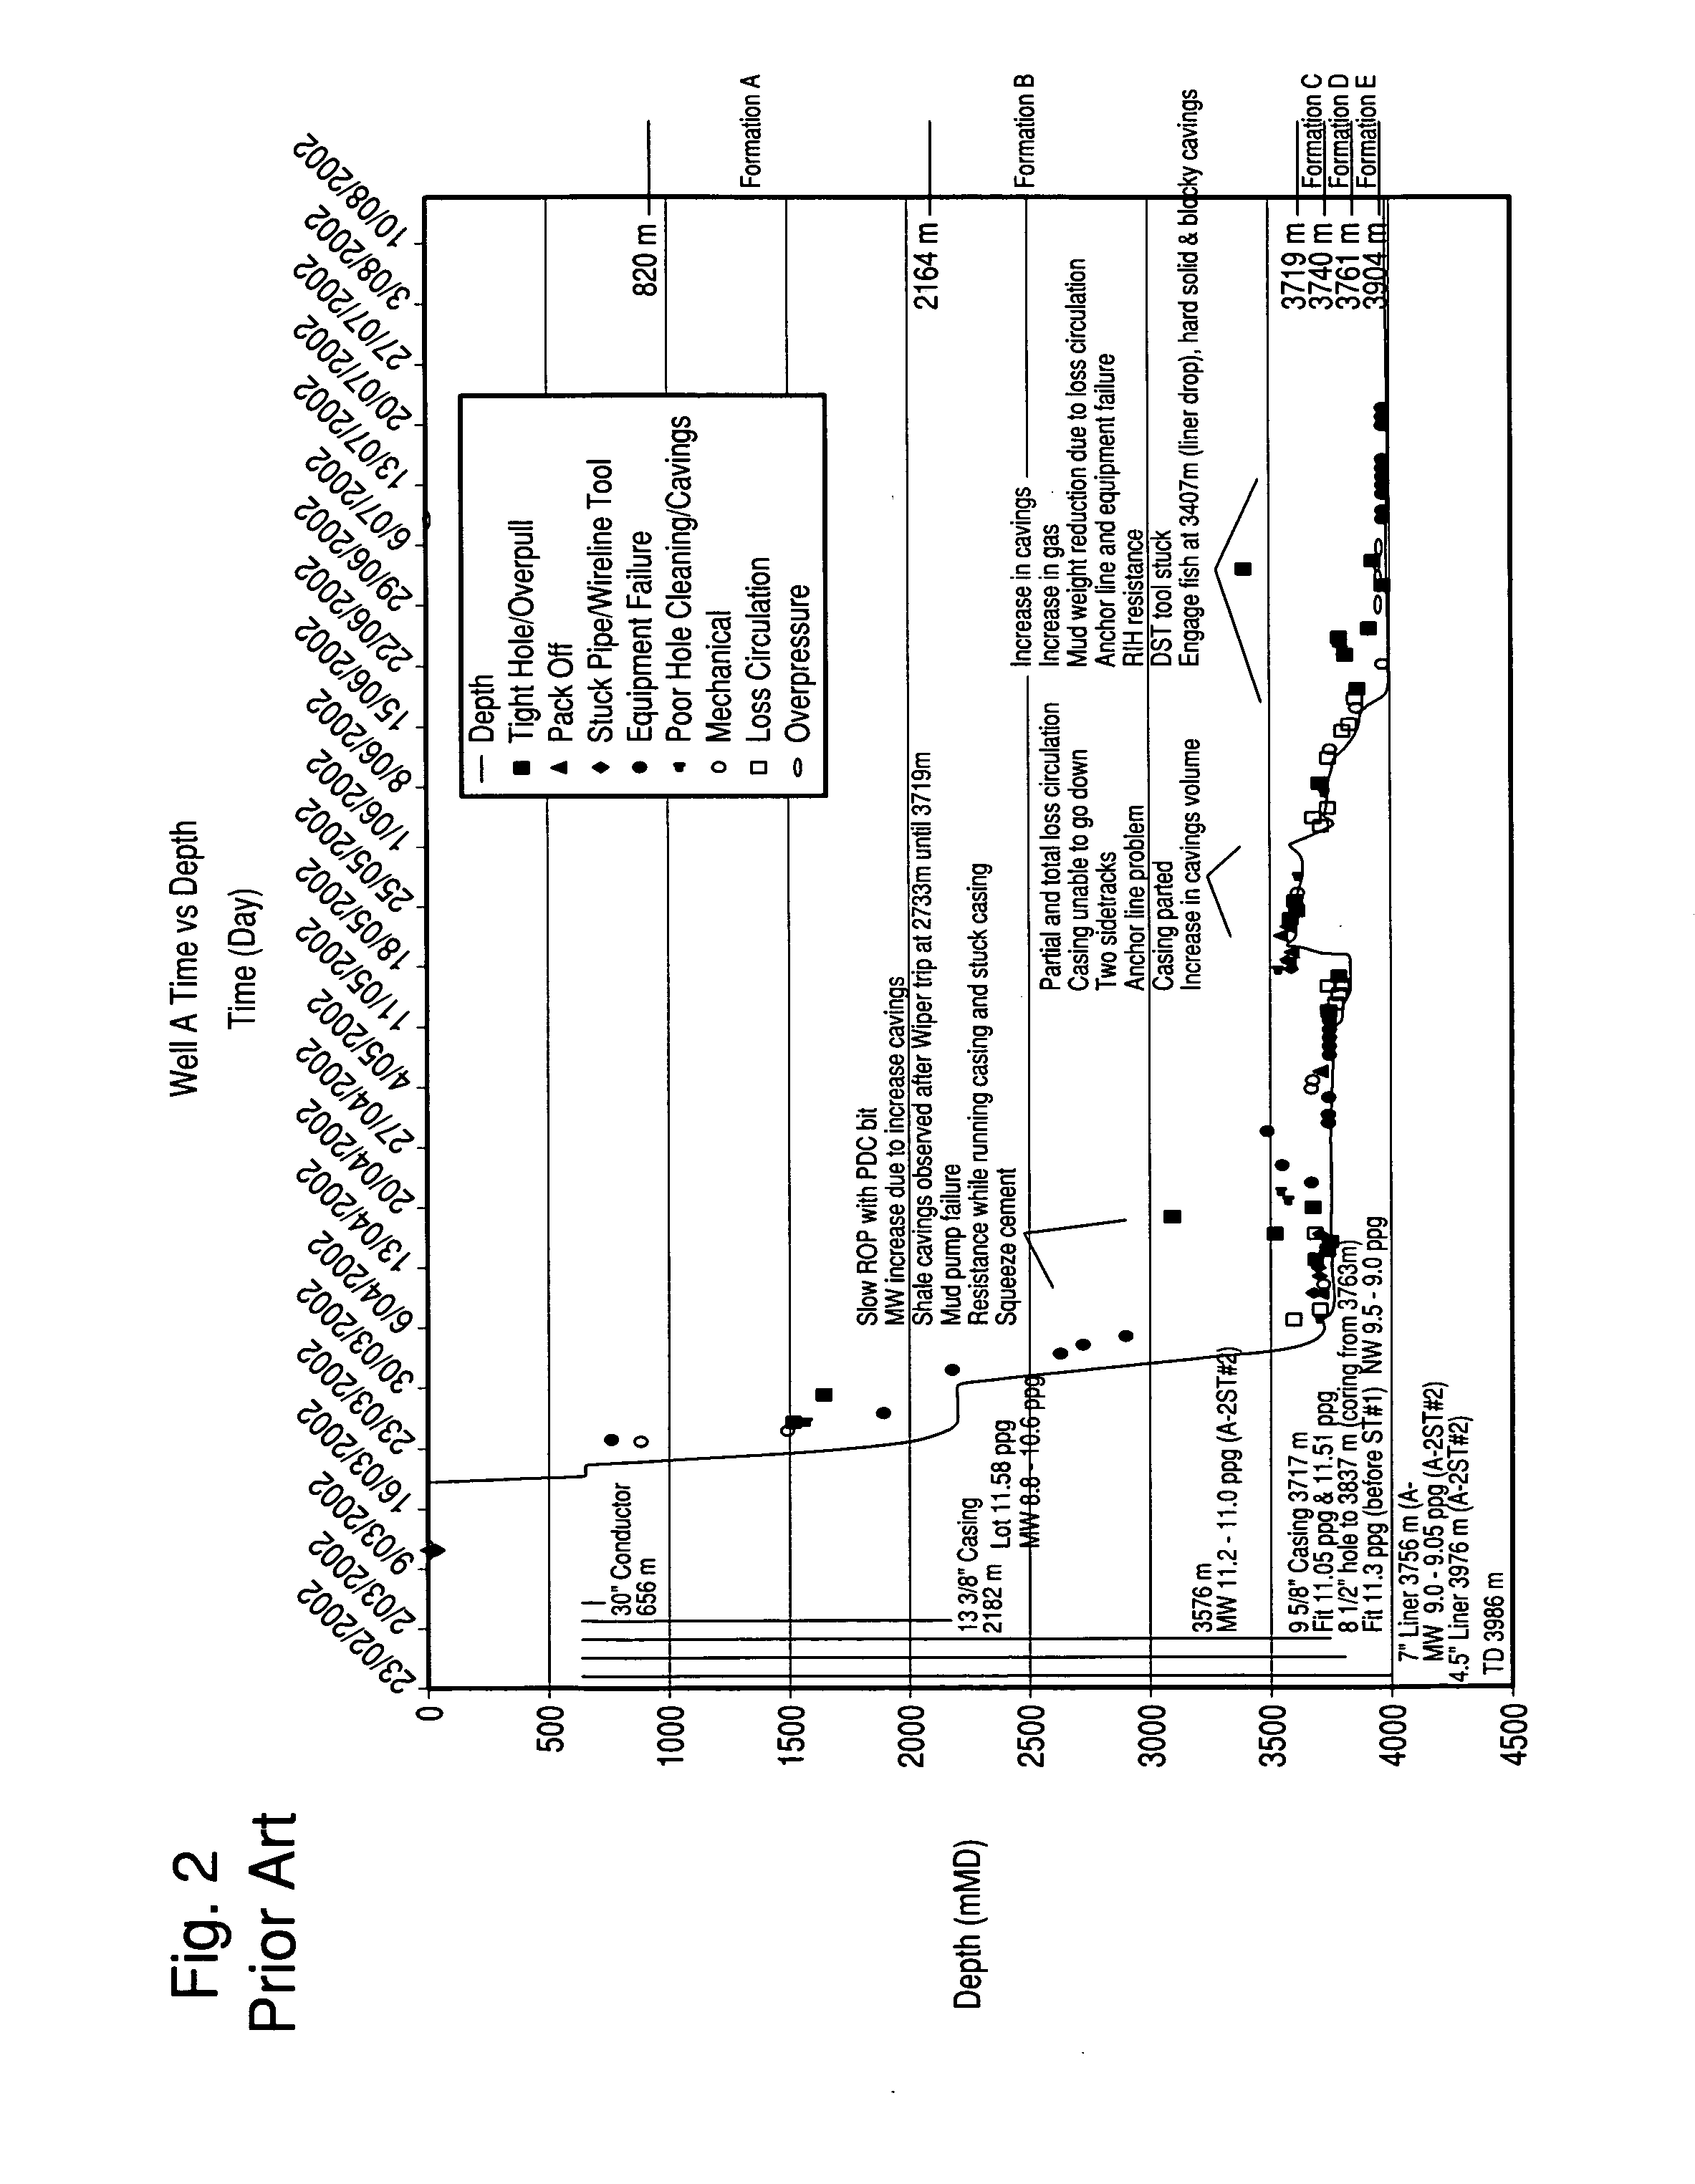 Method and computer program product for drilling mud design optimization to maintain time-dependent stability of argillaceous formations